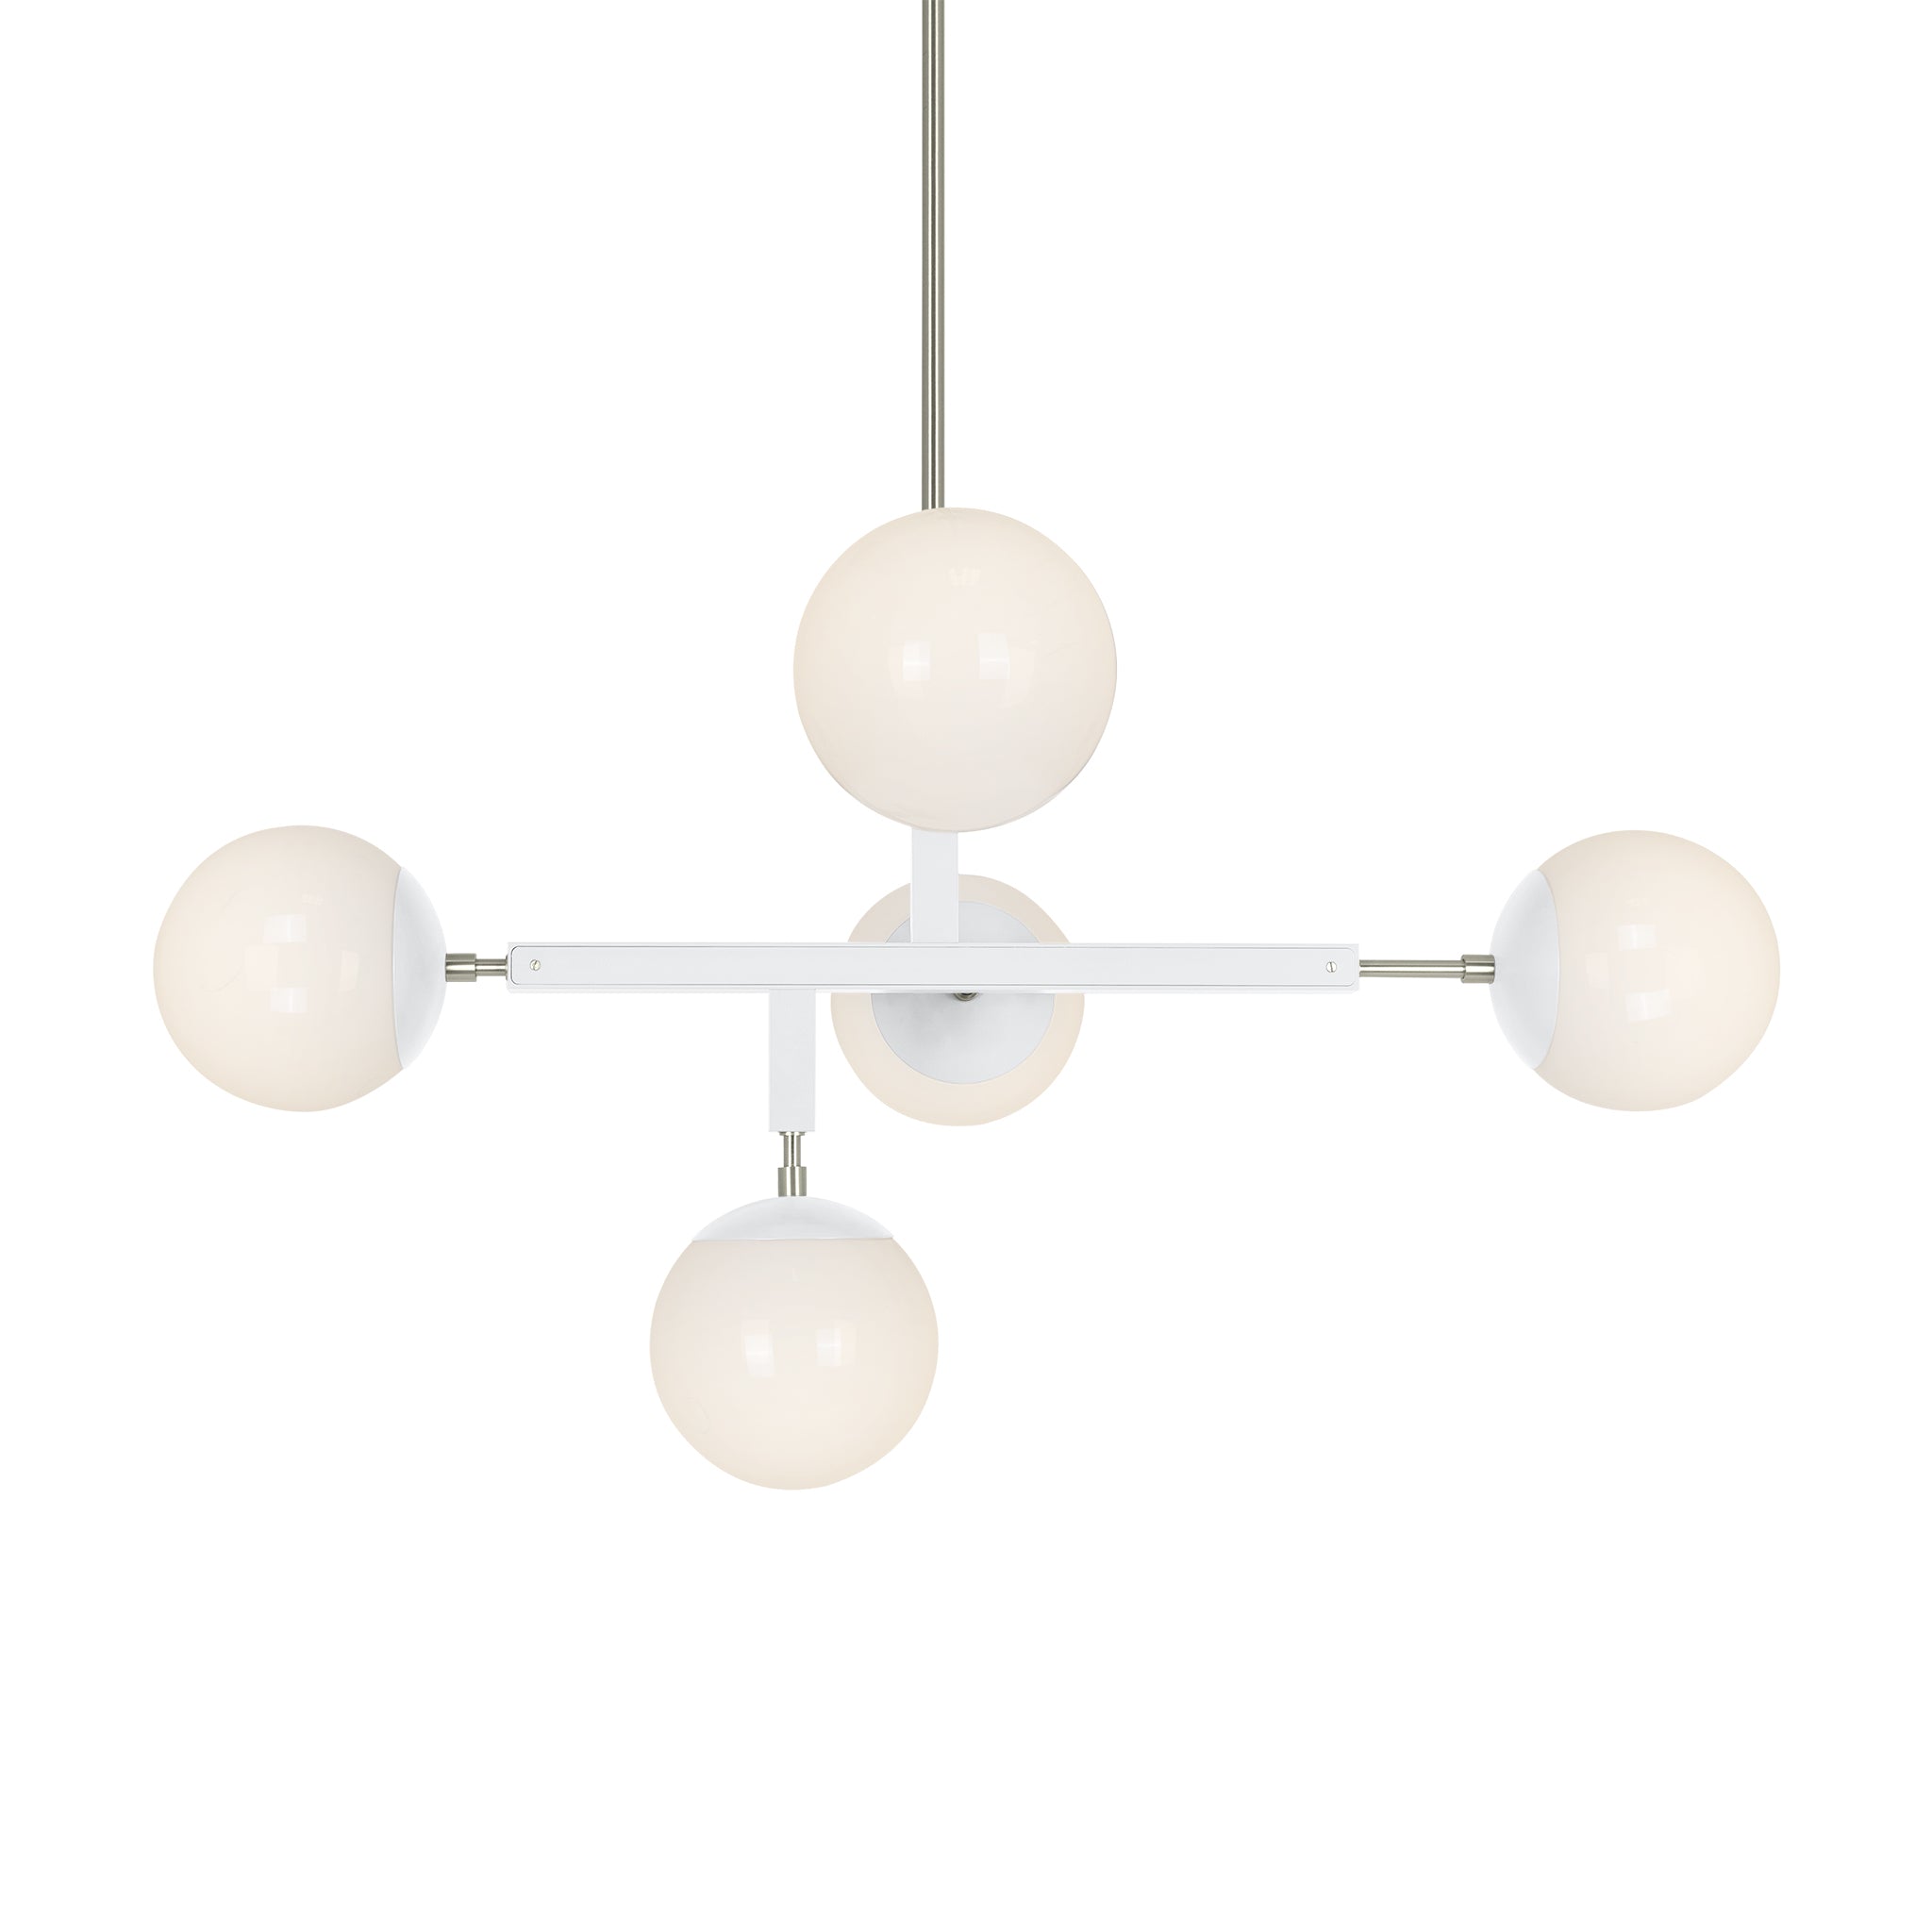 Nickel and white color Prisma chandelier 35" Dutton Brown lighting